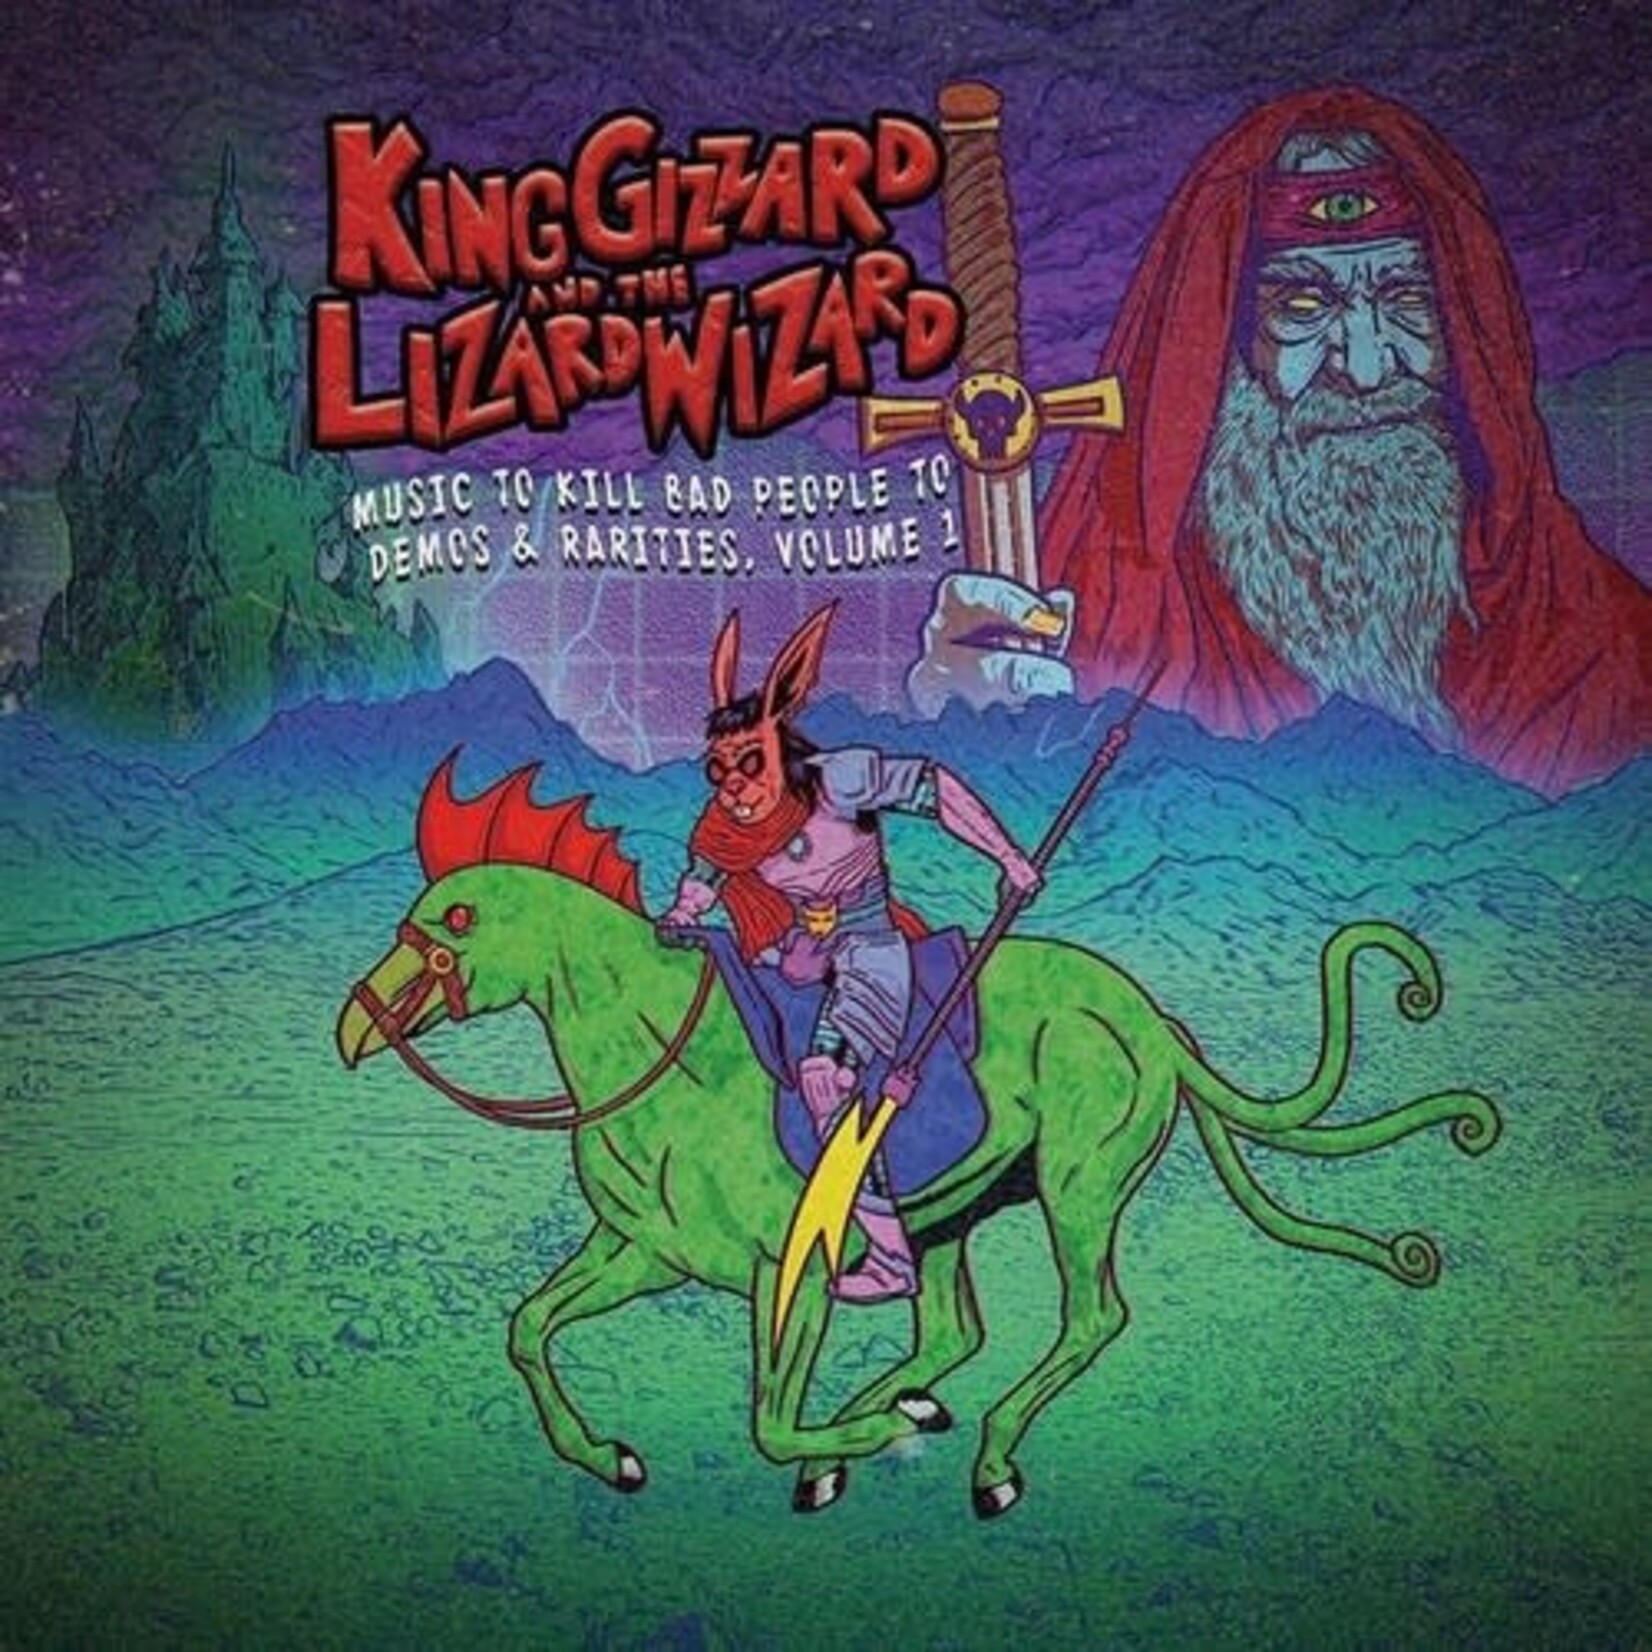 ORG King Gizzard and the Lizard Wizard - Music To Kill Bad People To Vol. 1 (LP) [Sea Foam]